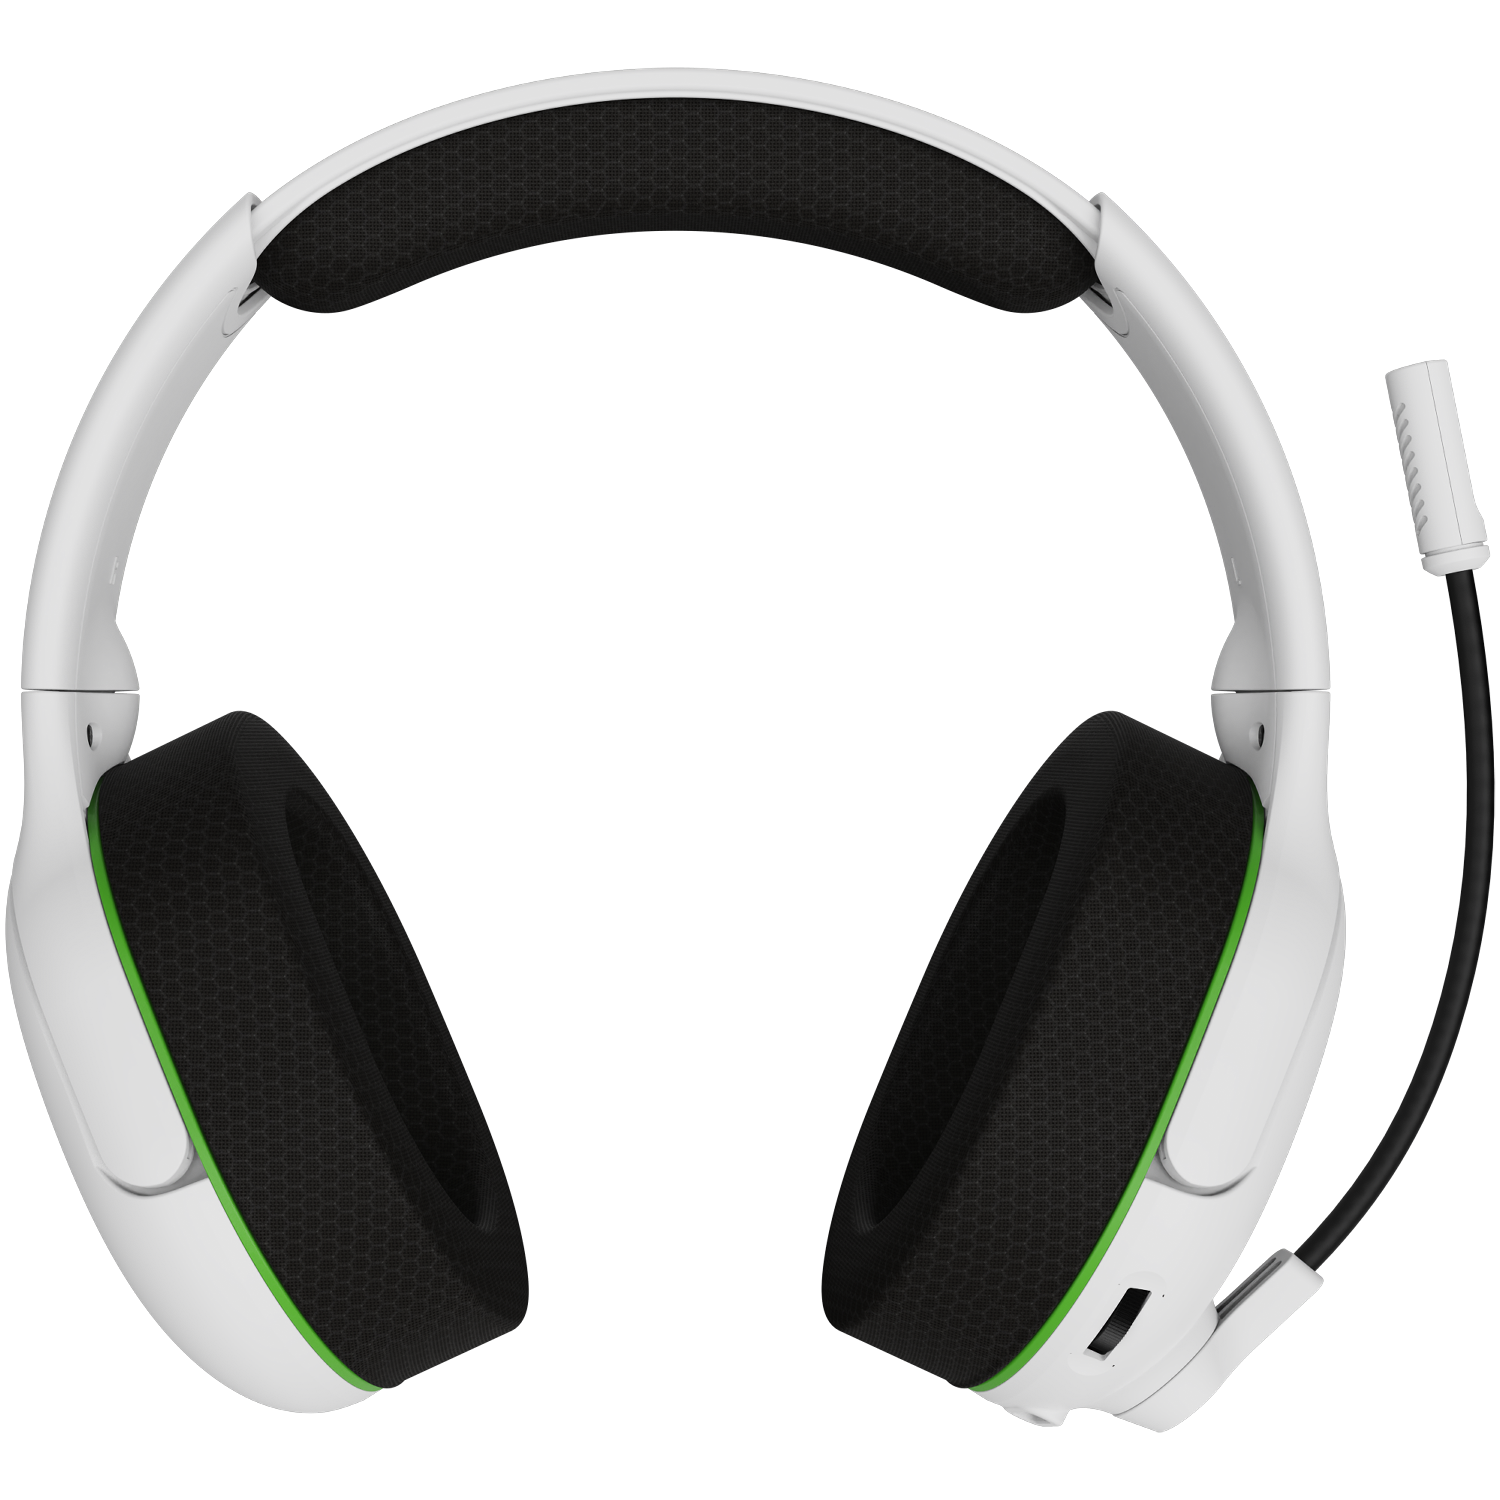 PDP Airlite Pro Wireless Headset with Mic for Xbox Series X|S, Xbox One, Windows 10/11 - White